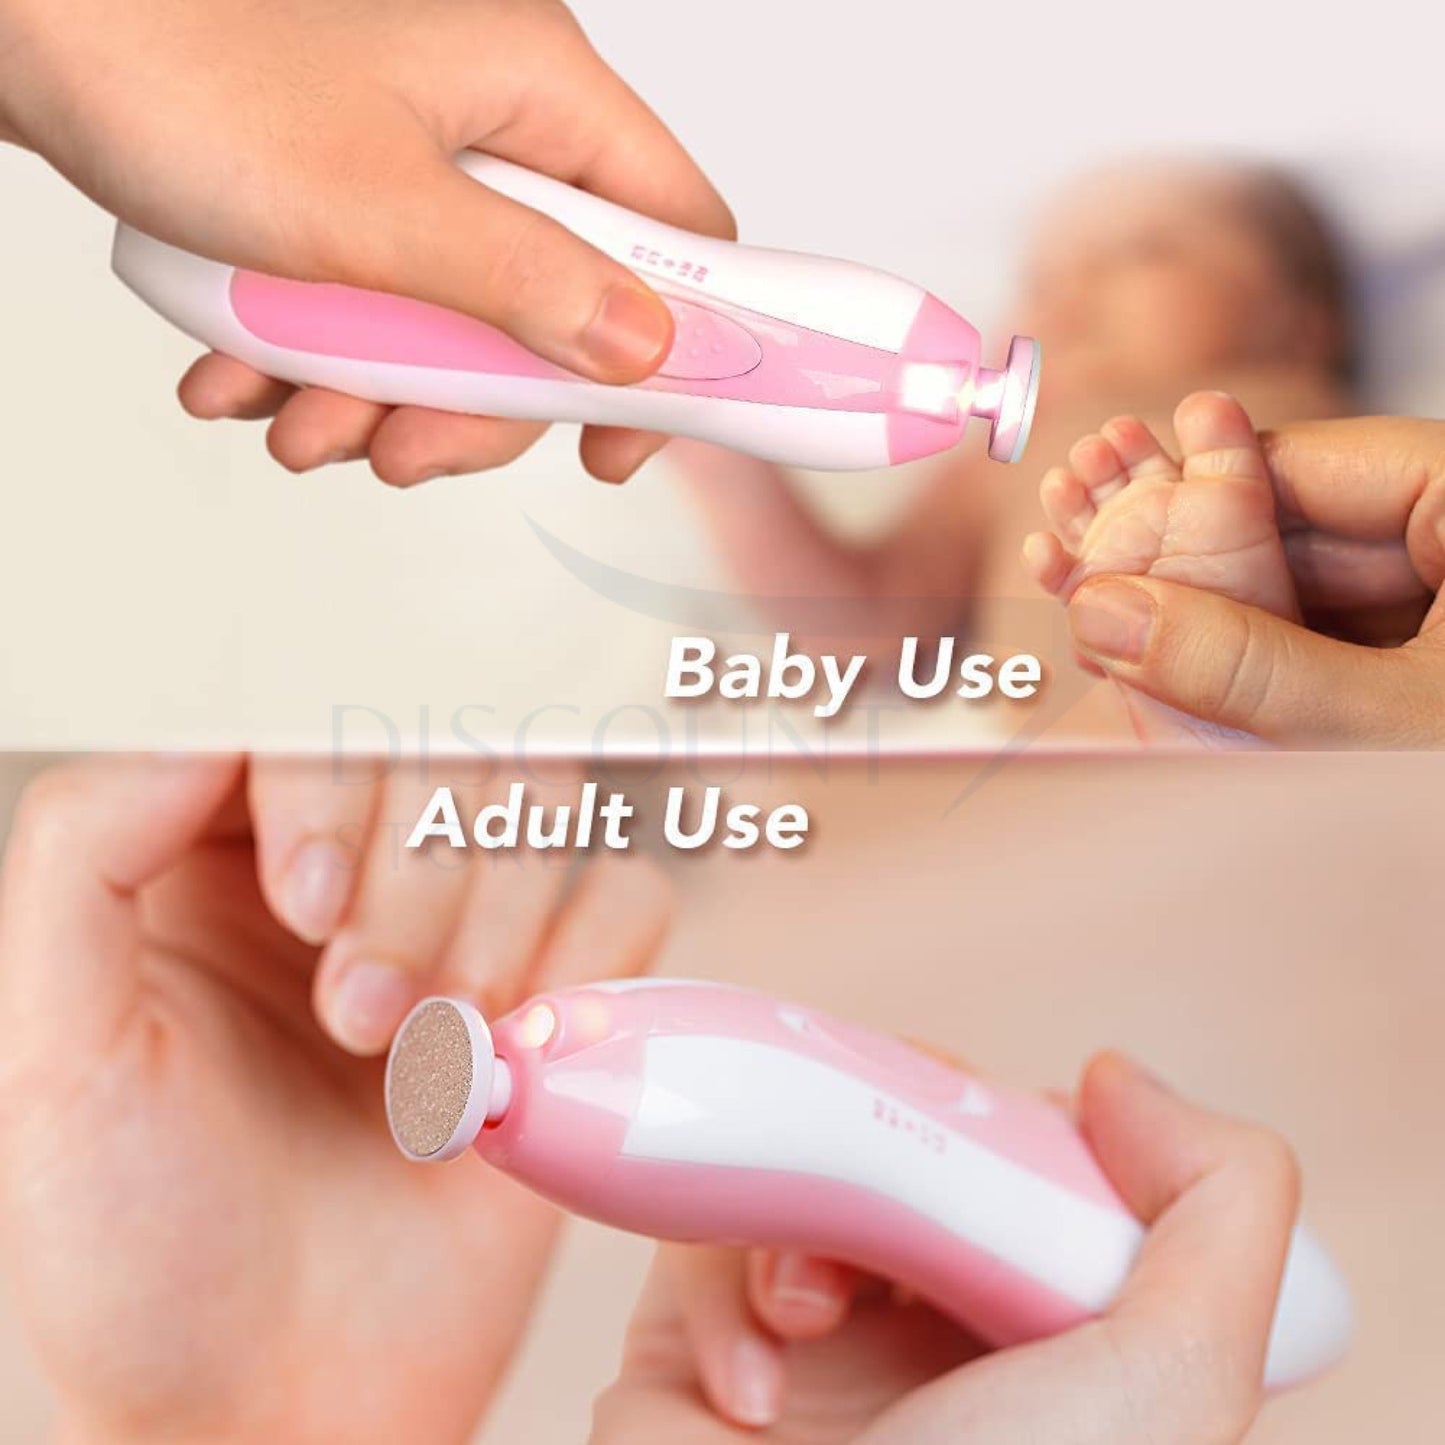 6 in 1 Electric Baby Nail Trimmer & Clipper Set - (FREE Delivery)